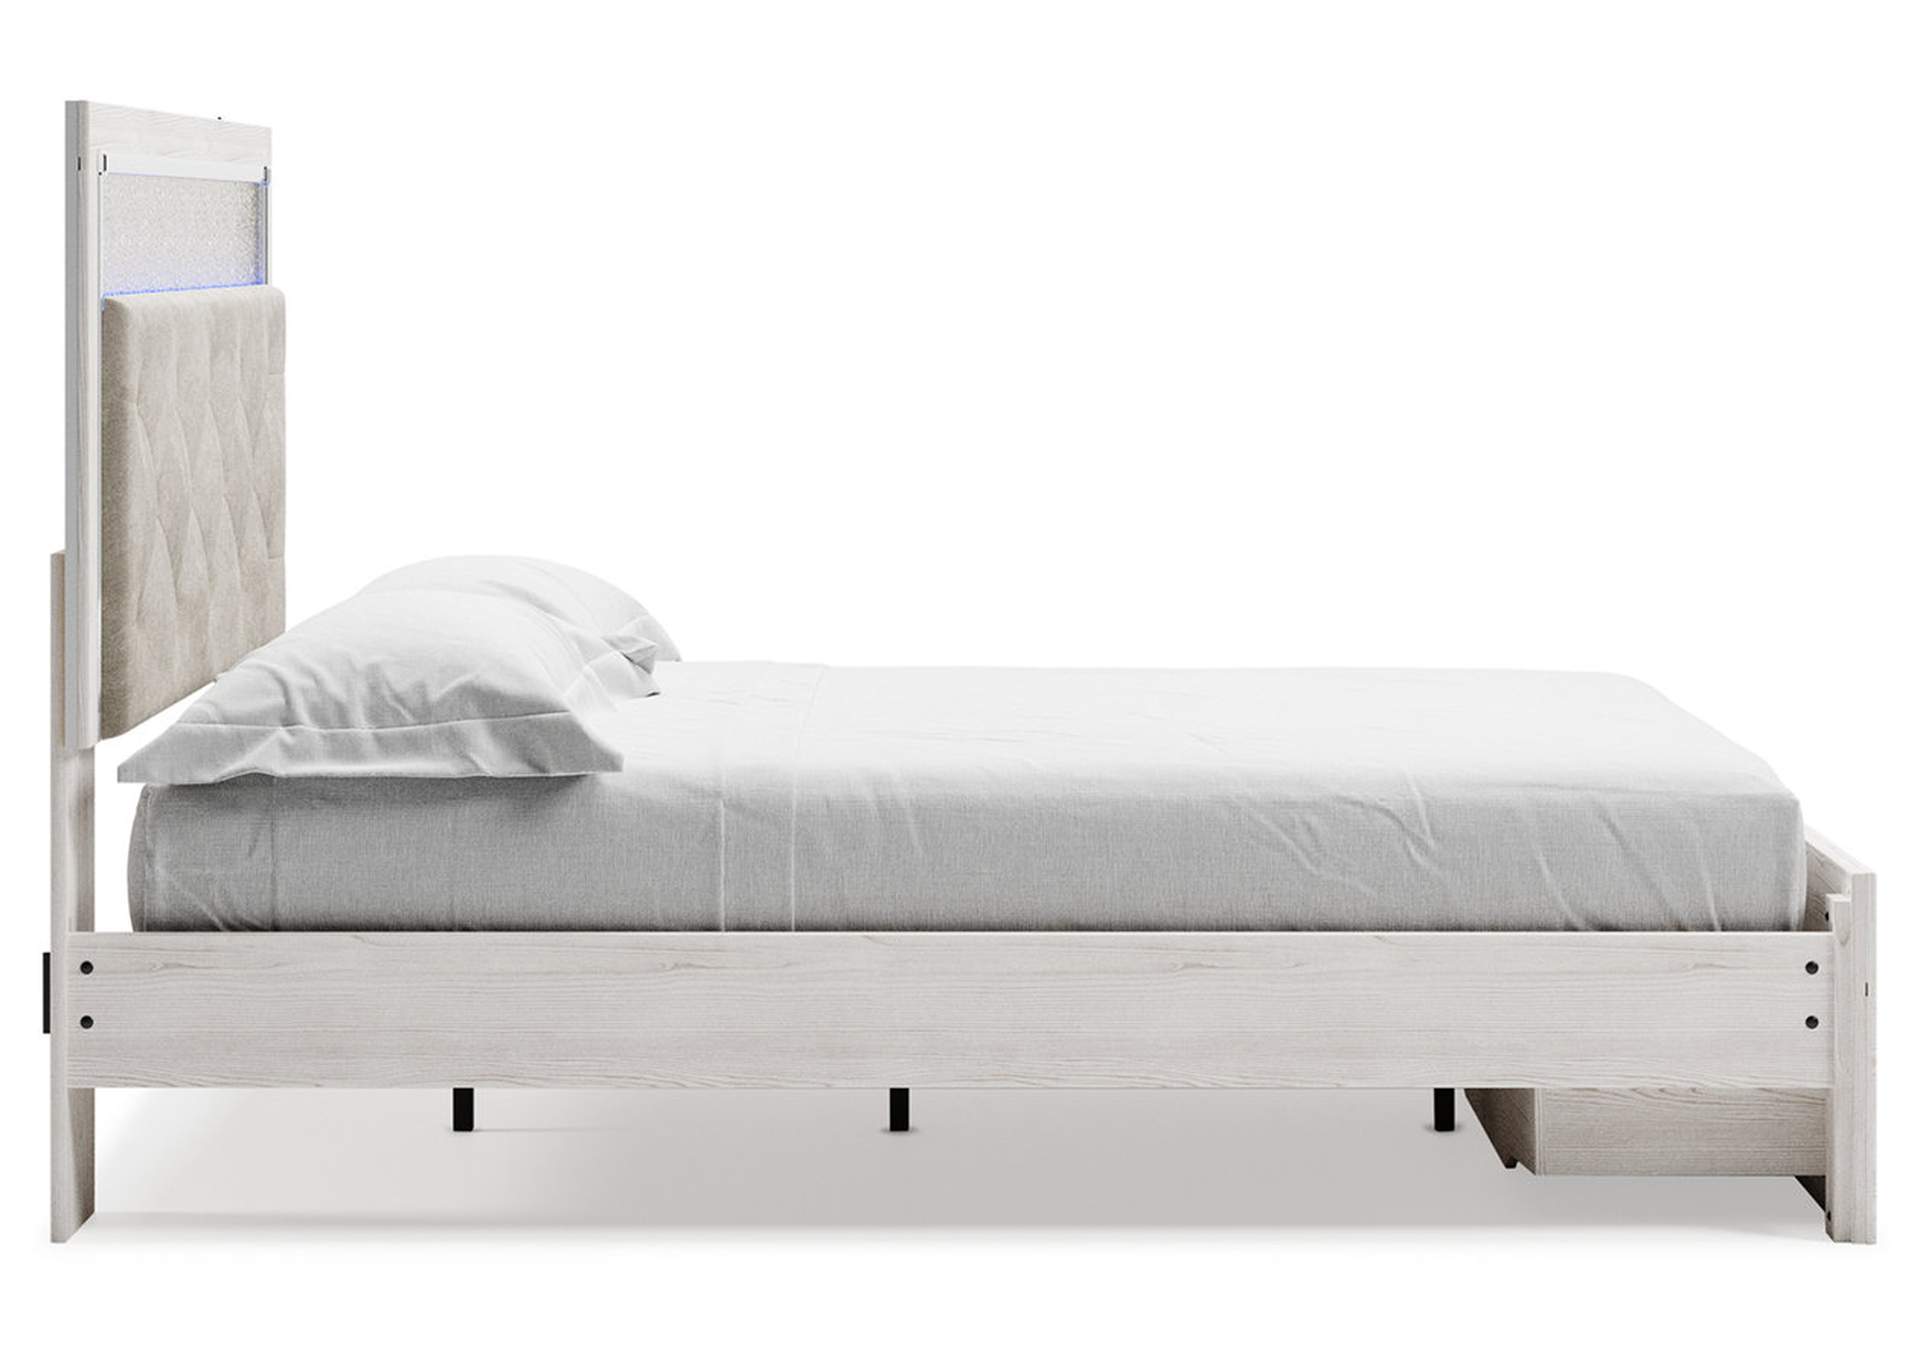 Altyra Queen Upholstered Storage Bed,Signature Design By Ashley